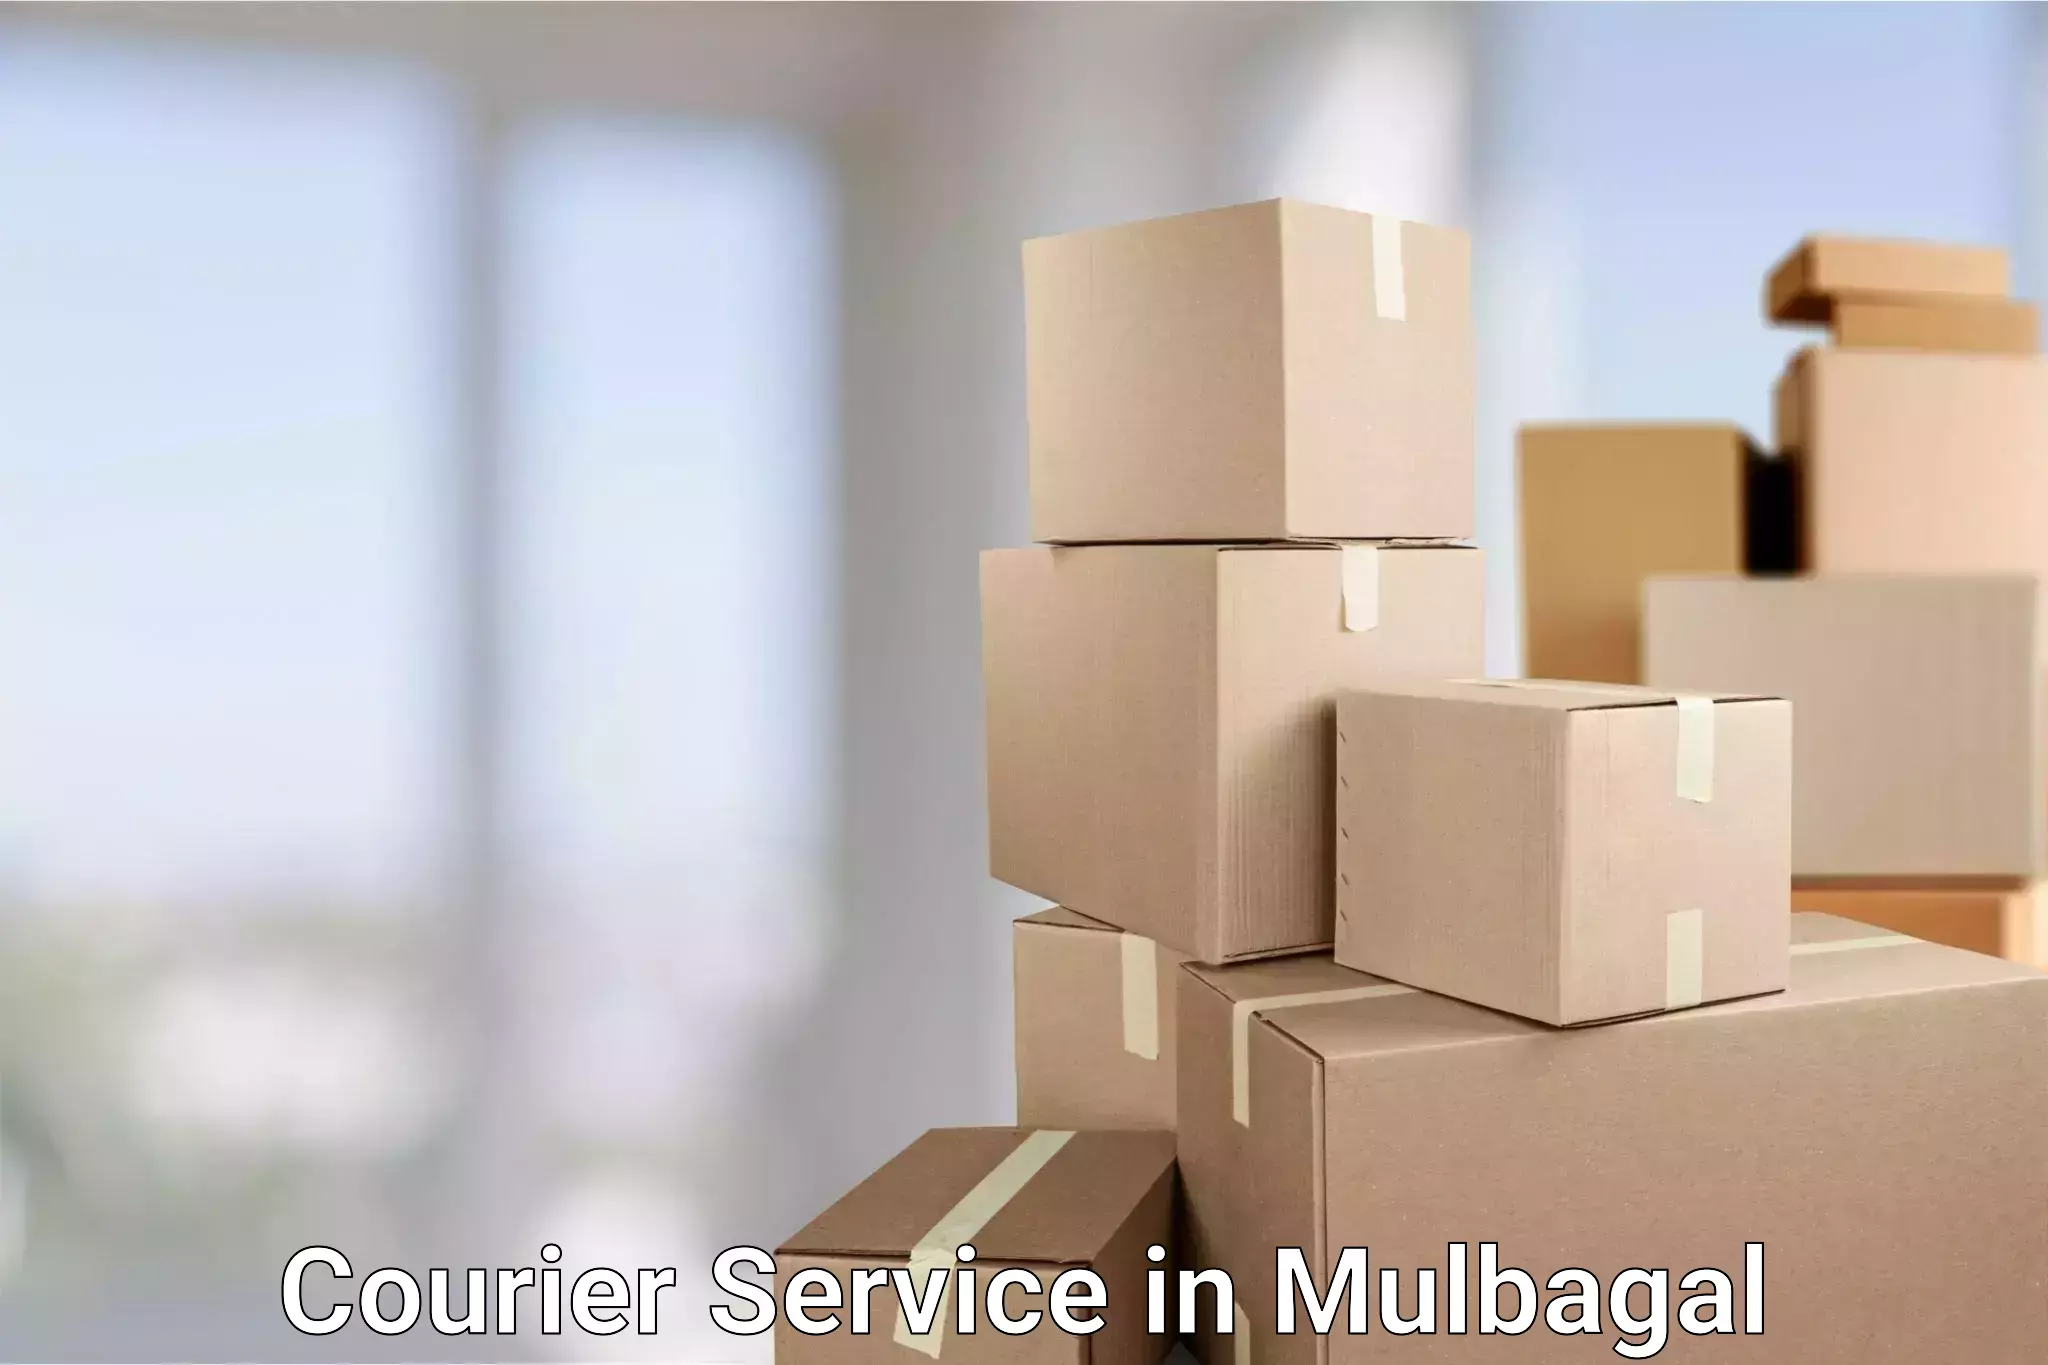 Innovative logistics solutions in Mulbagal